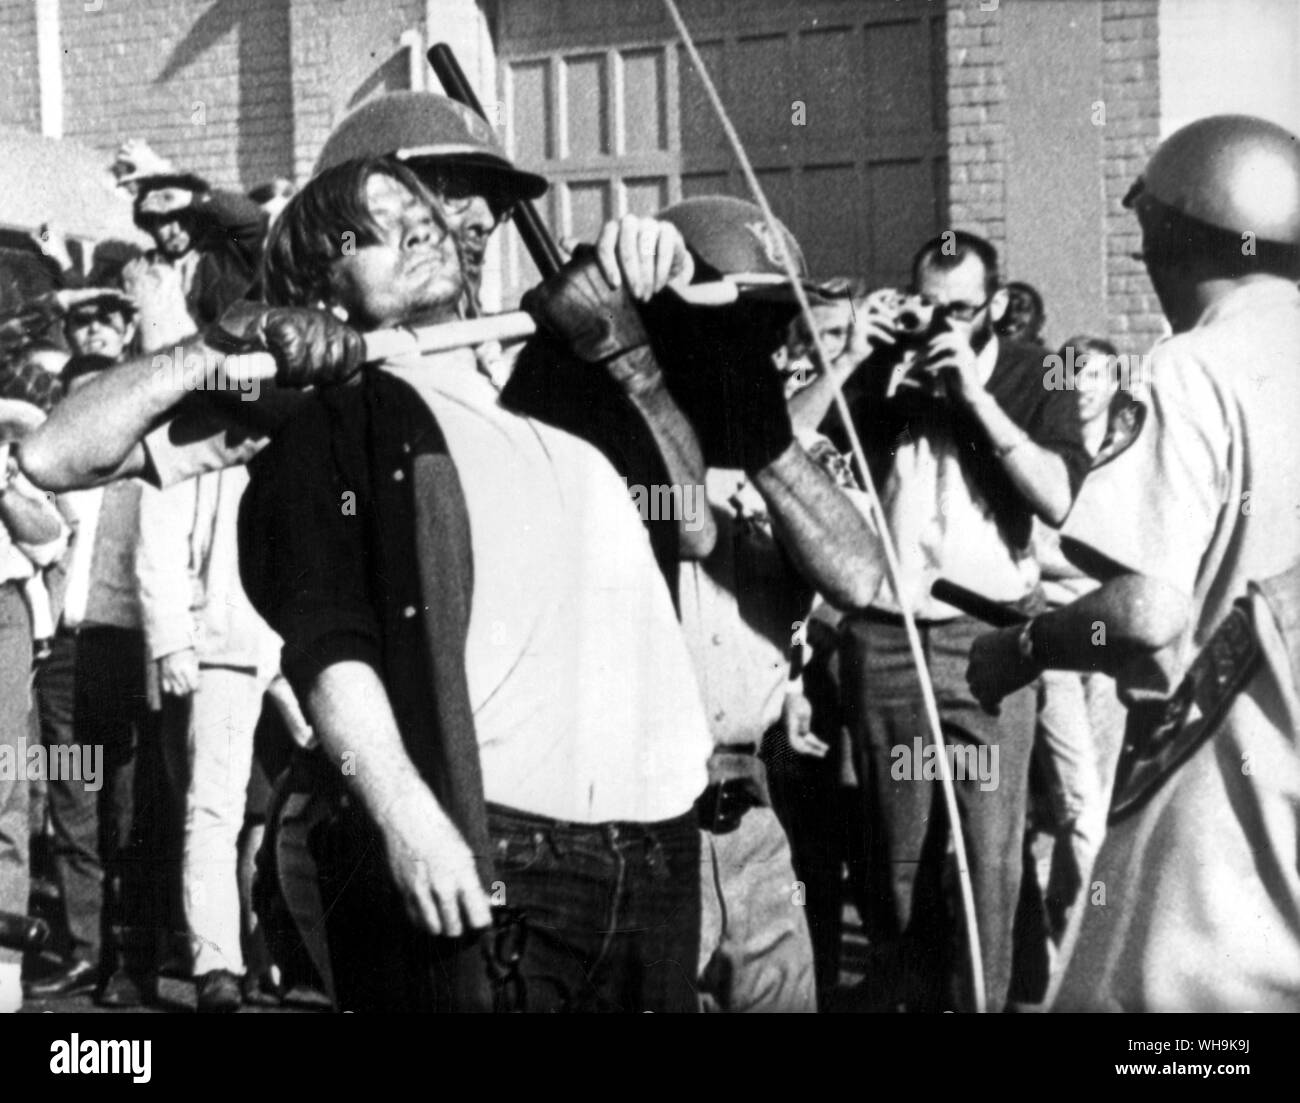 20th Oct. 1967: Oakland: A policeman uses his night stick to stop antics of an anti-draft demonstrator at Oakland Army Induction Centre. 10,000 demonstrators were on hand during the fifth day of protest there. Stock Photo